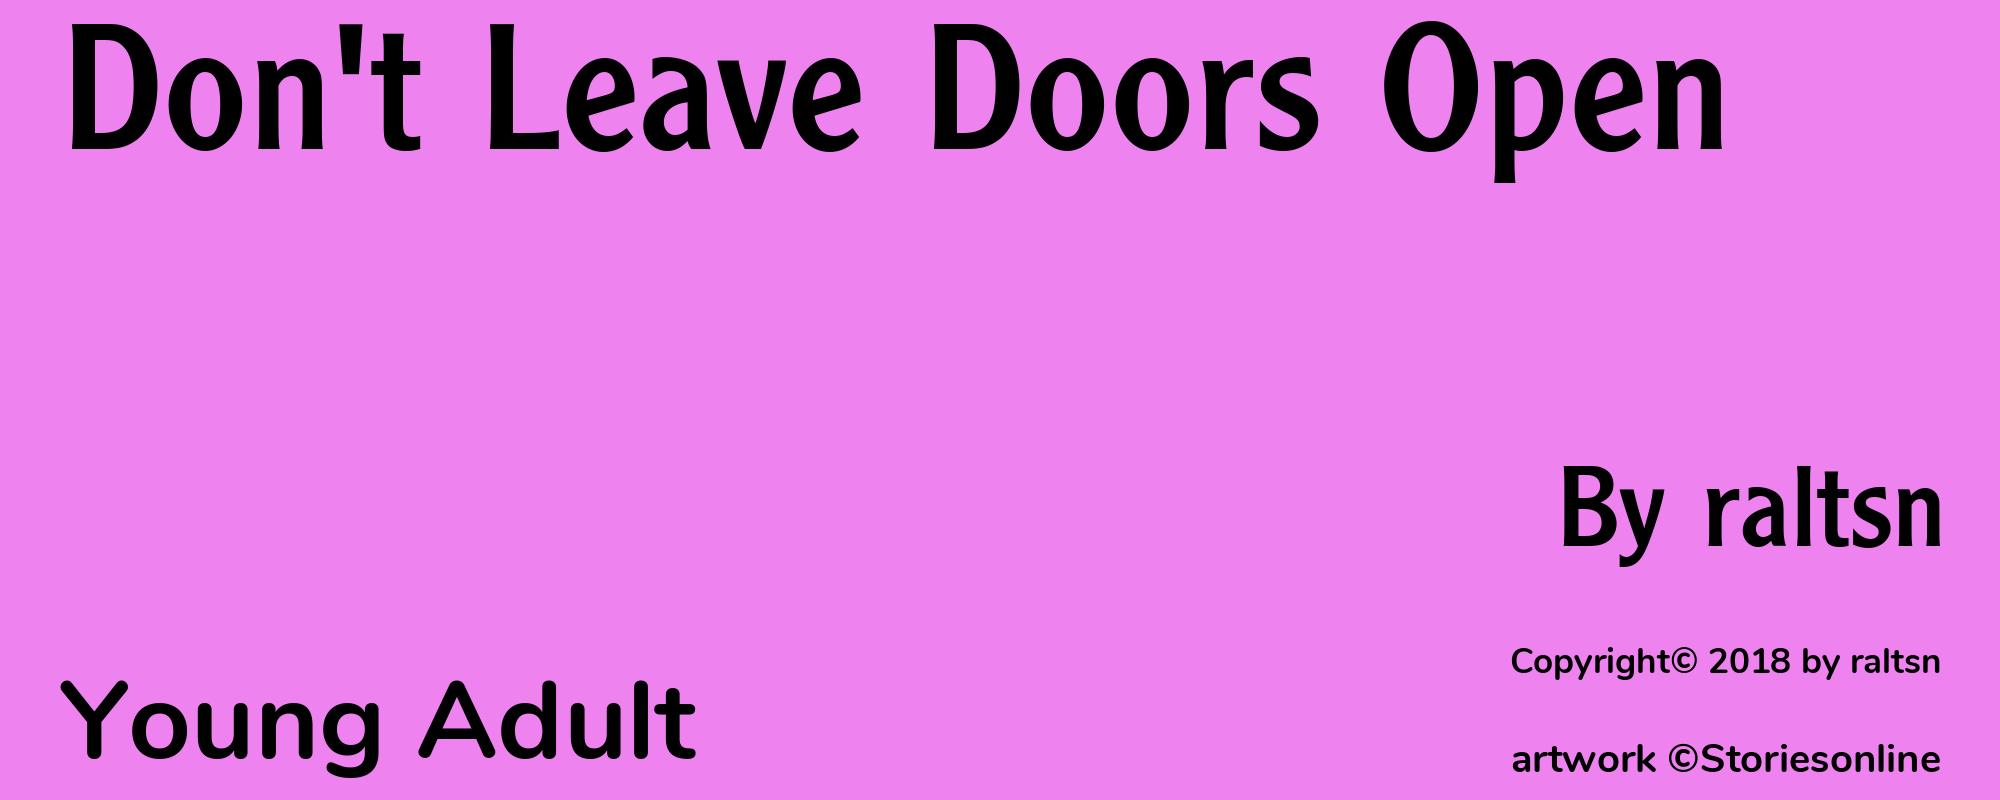 Don't Leave Doors Open - Cover